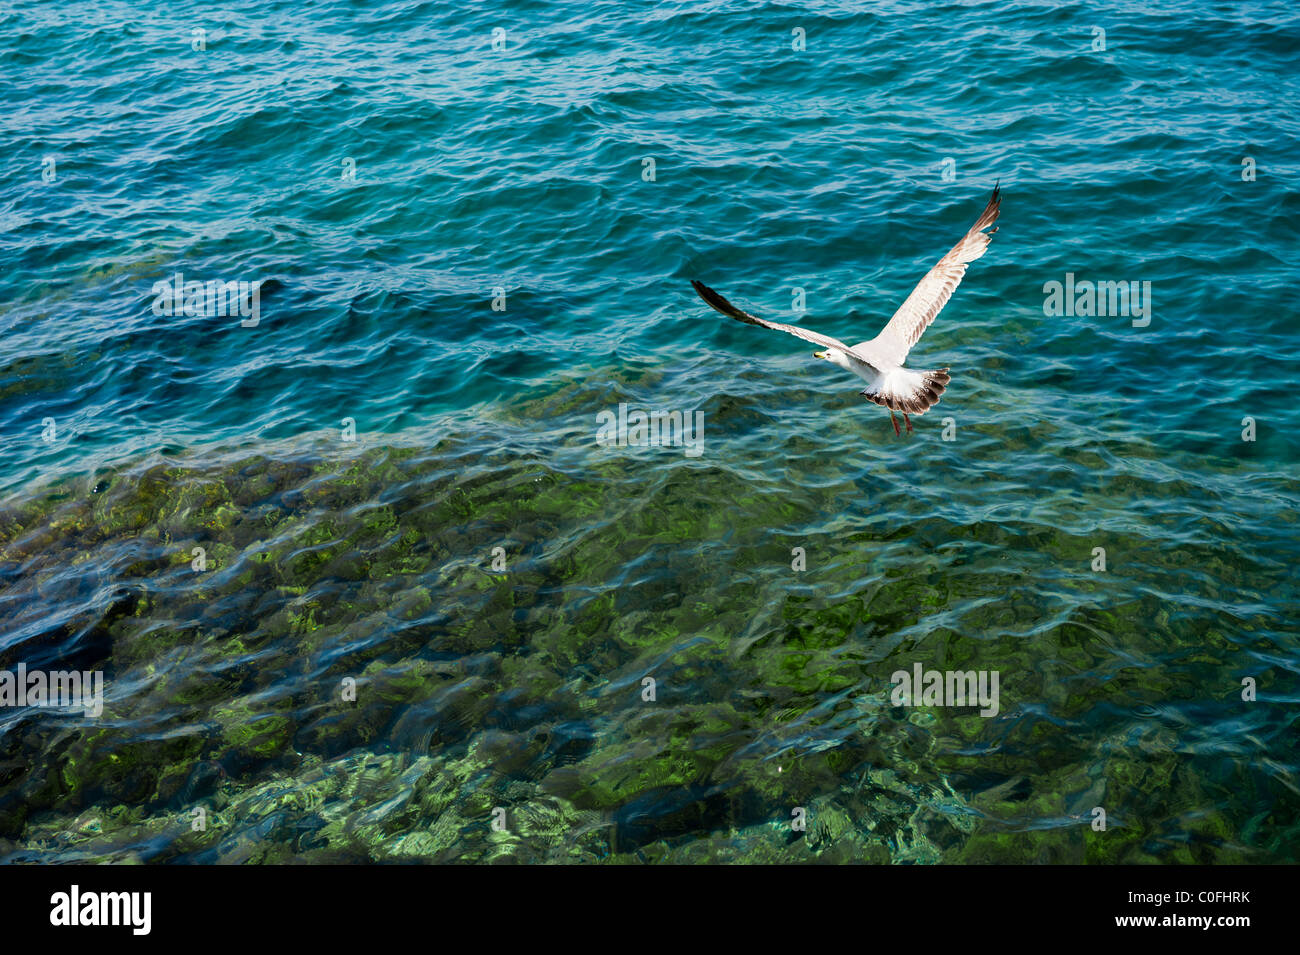 White seagull flying over clear turquoise sea water. Stock Photo